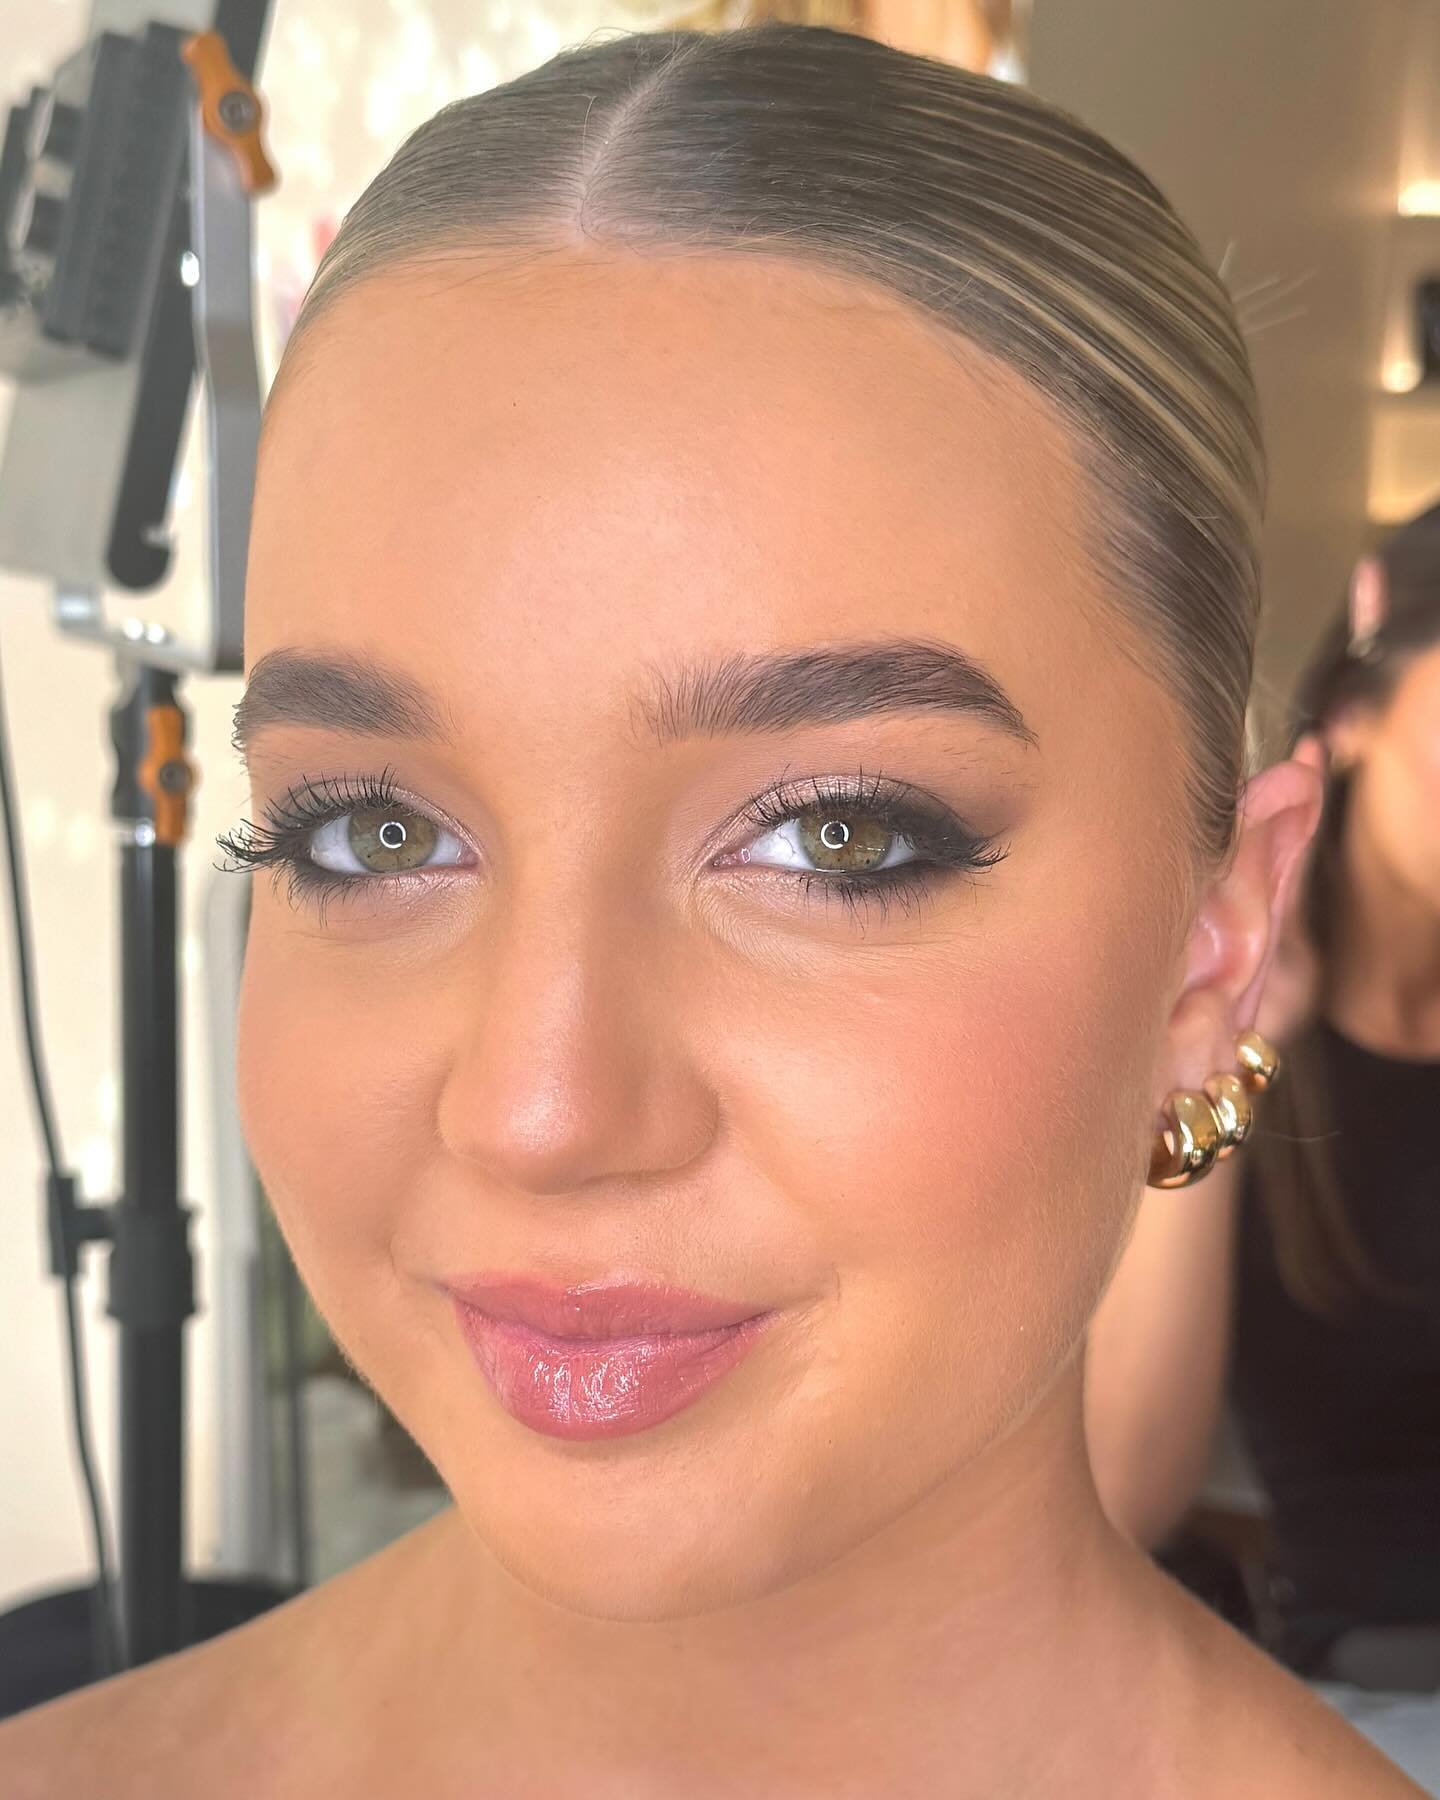 The bridal look I recreated on my beautiful model @livmilne_ 

I just love being a student again and learning different techniques and styles 😍

#by_kirra #waggamakeupartist
#waggaweddings #makeup
#waggamakeup 
#waggaformal
#riverinawedding